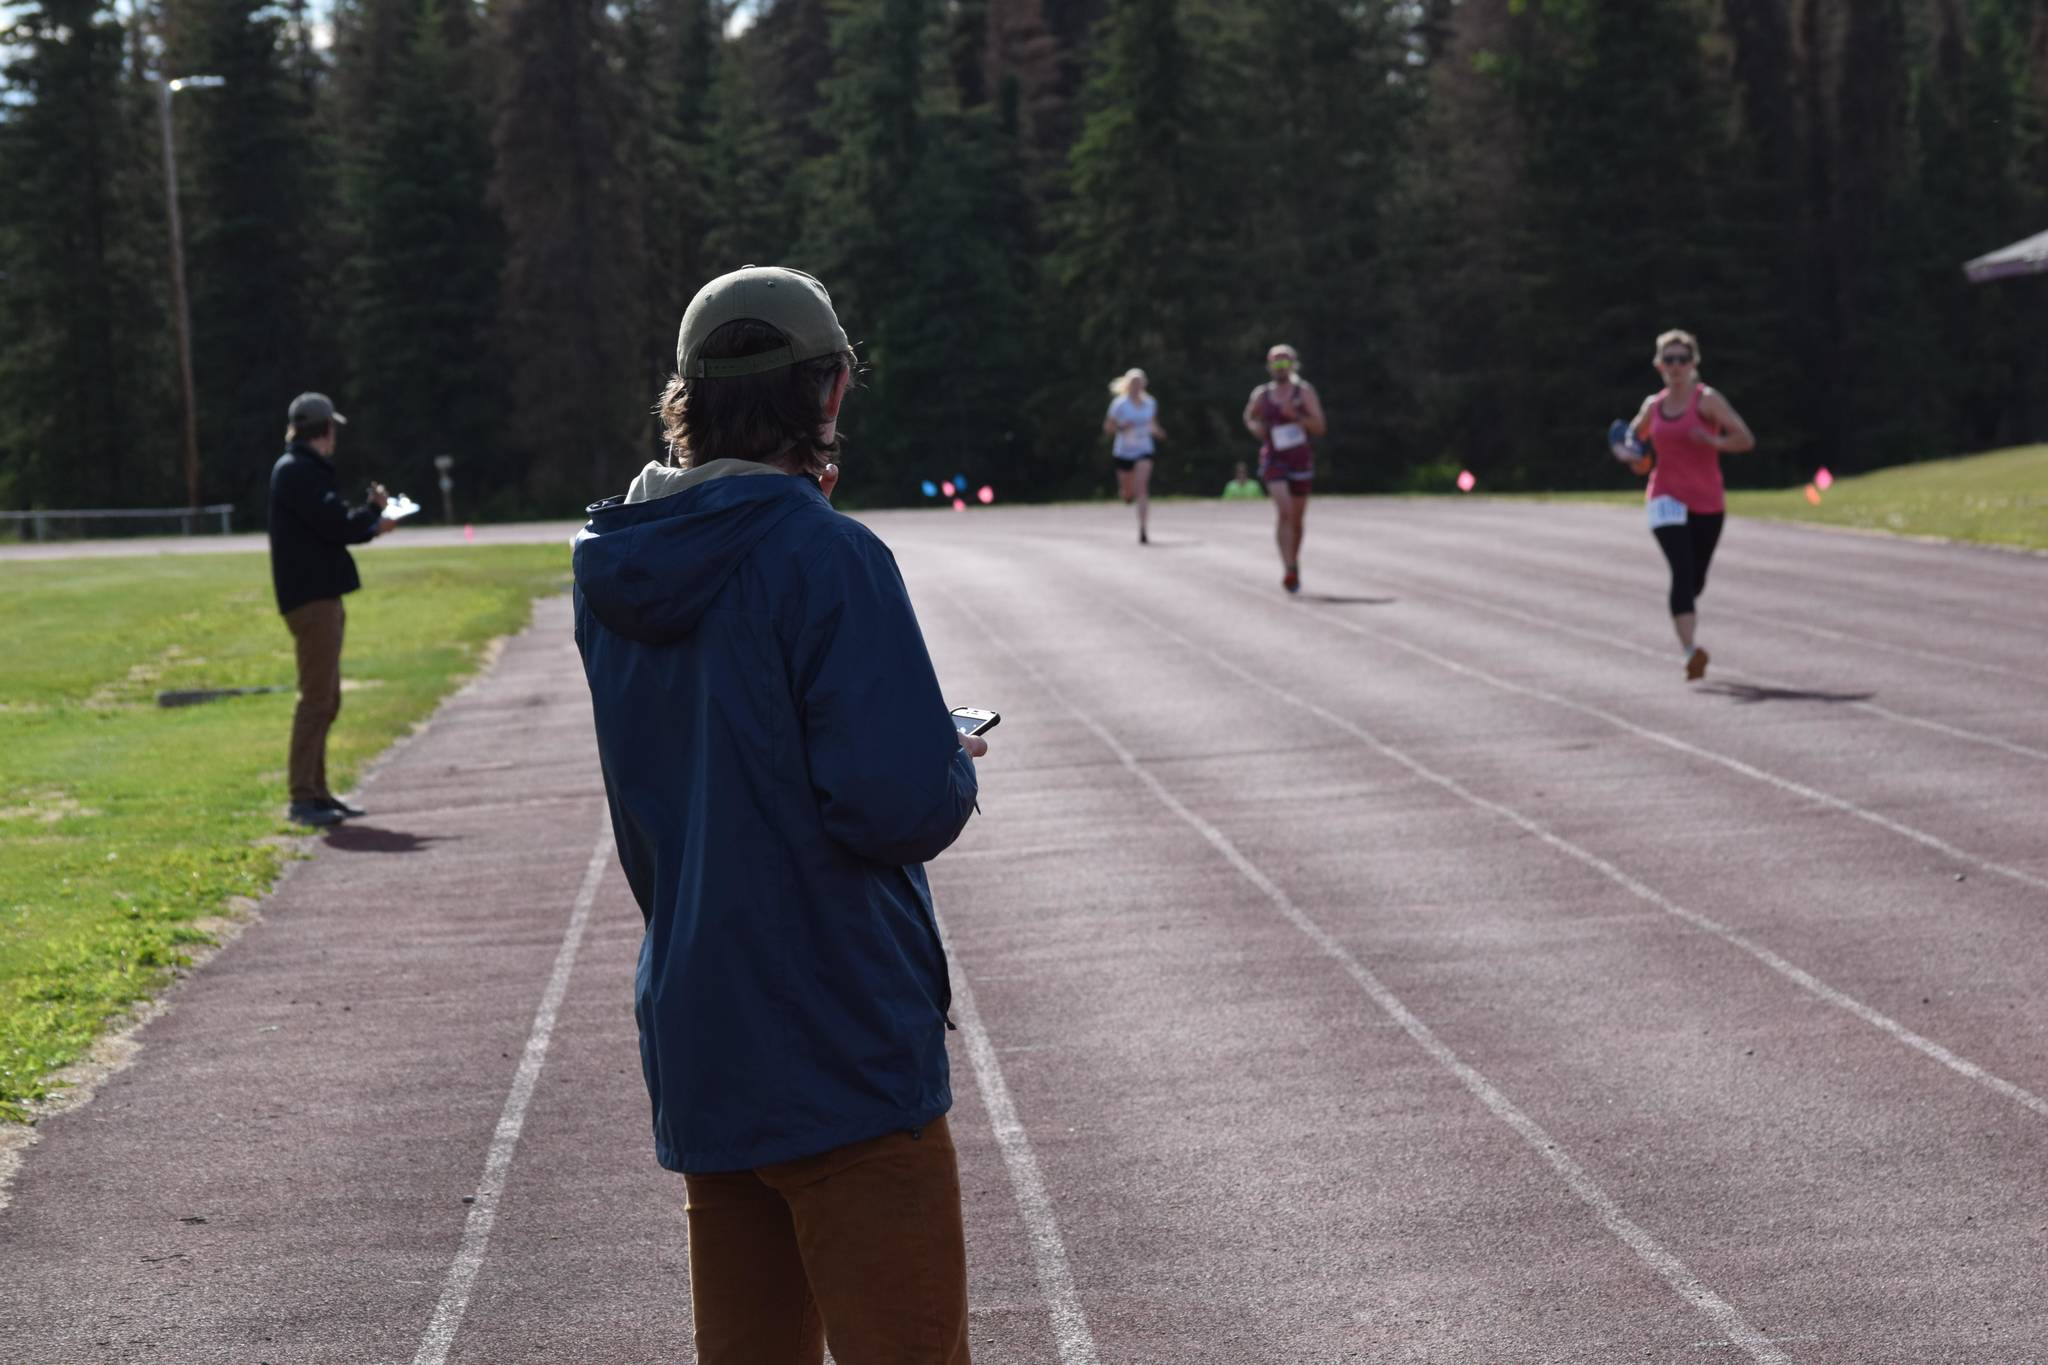 Kenai Watershed Forum Stream Watch Interns Brandom Drzazgowski and Jack Buban record 5K times of participants in the first race of the Salmon Run Series at the Skyview Middle School track on Wednesday, July 7, 2021. (Camille Botello / Peninsula Clarion)